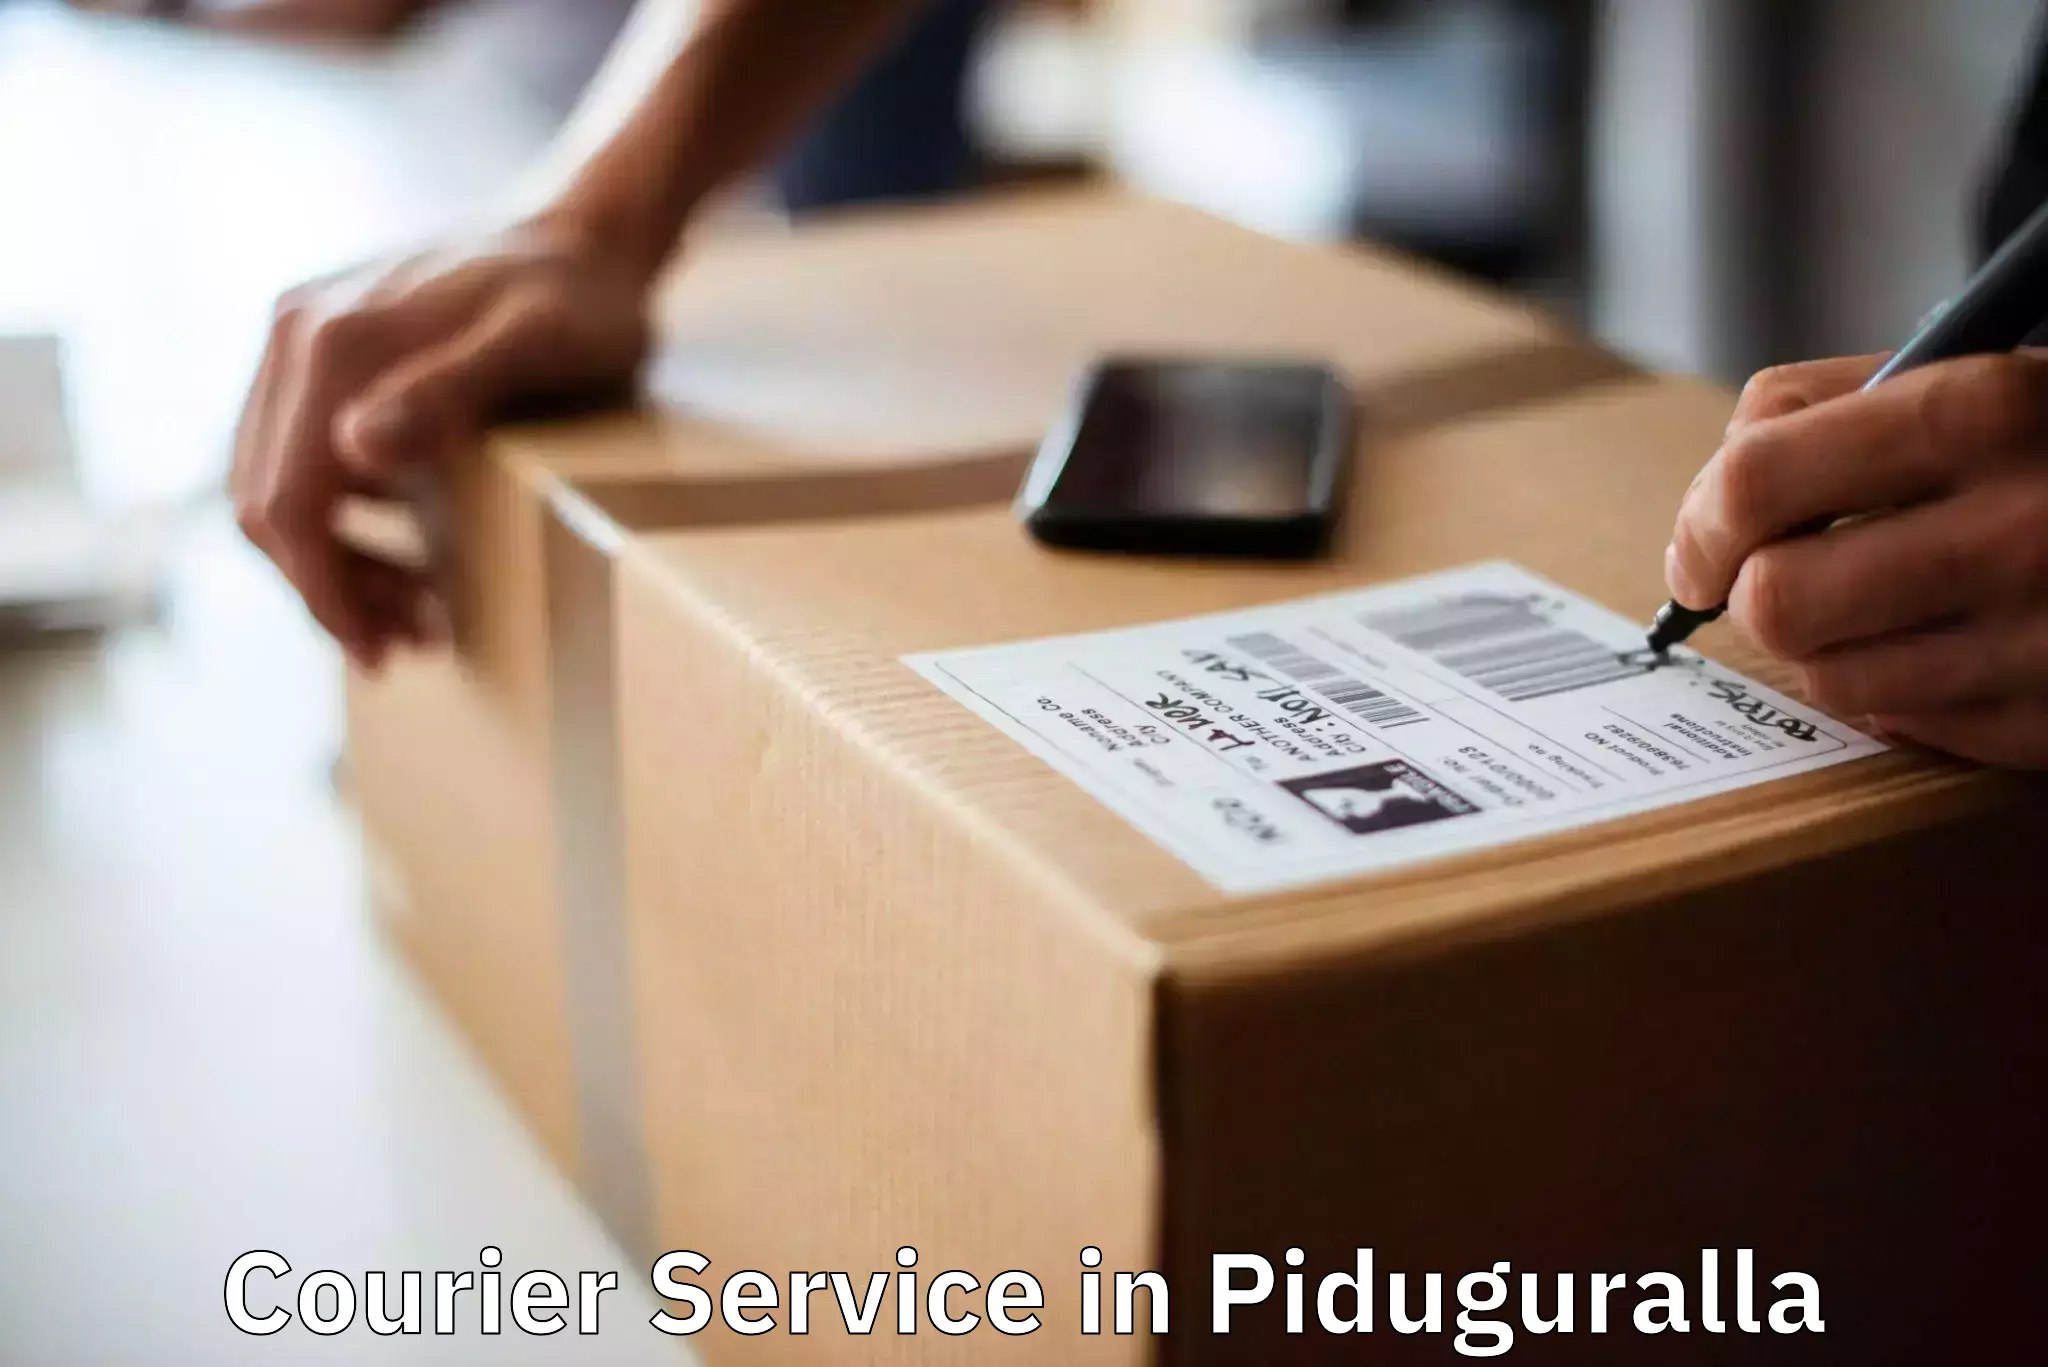 State-of-the-art courier technology in Piduguralla